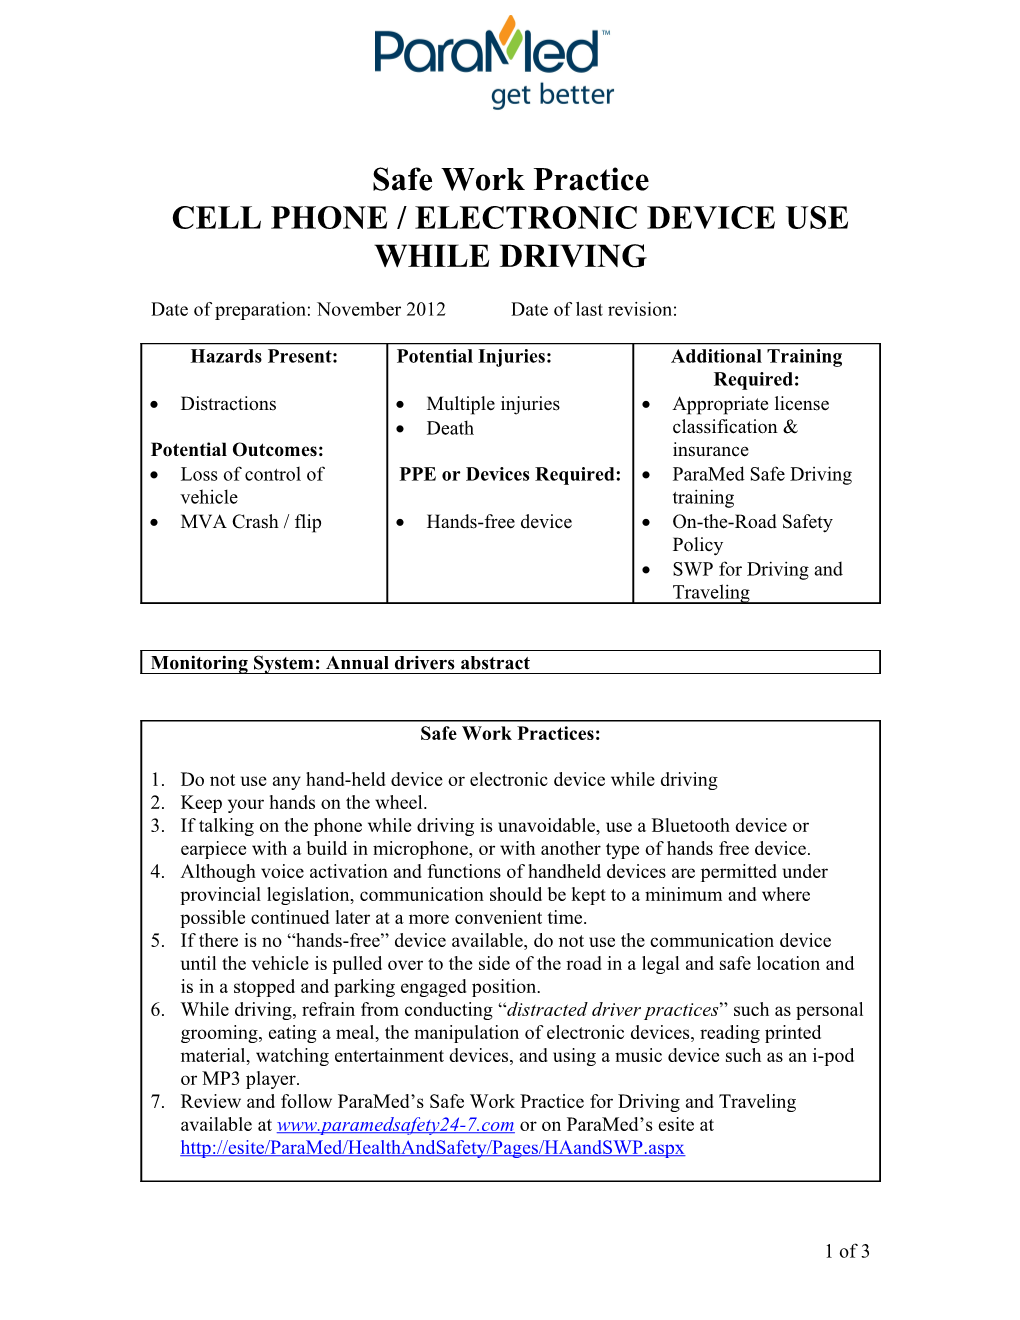 Cell Phone / Electronic Device Use While Driving